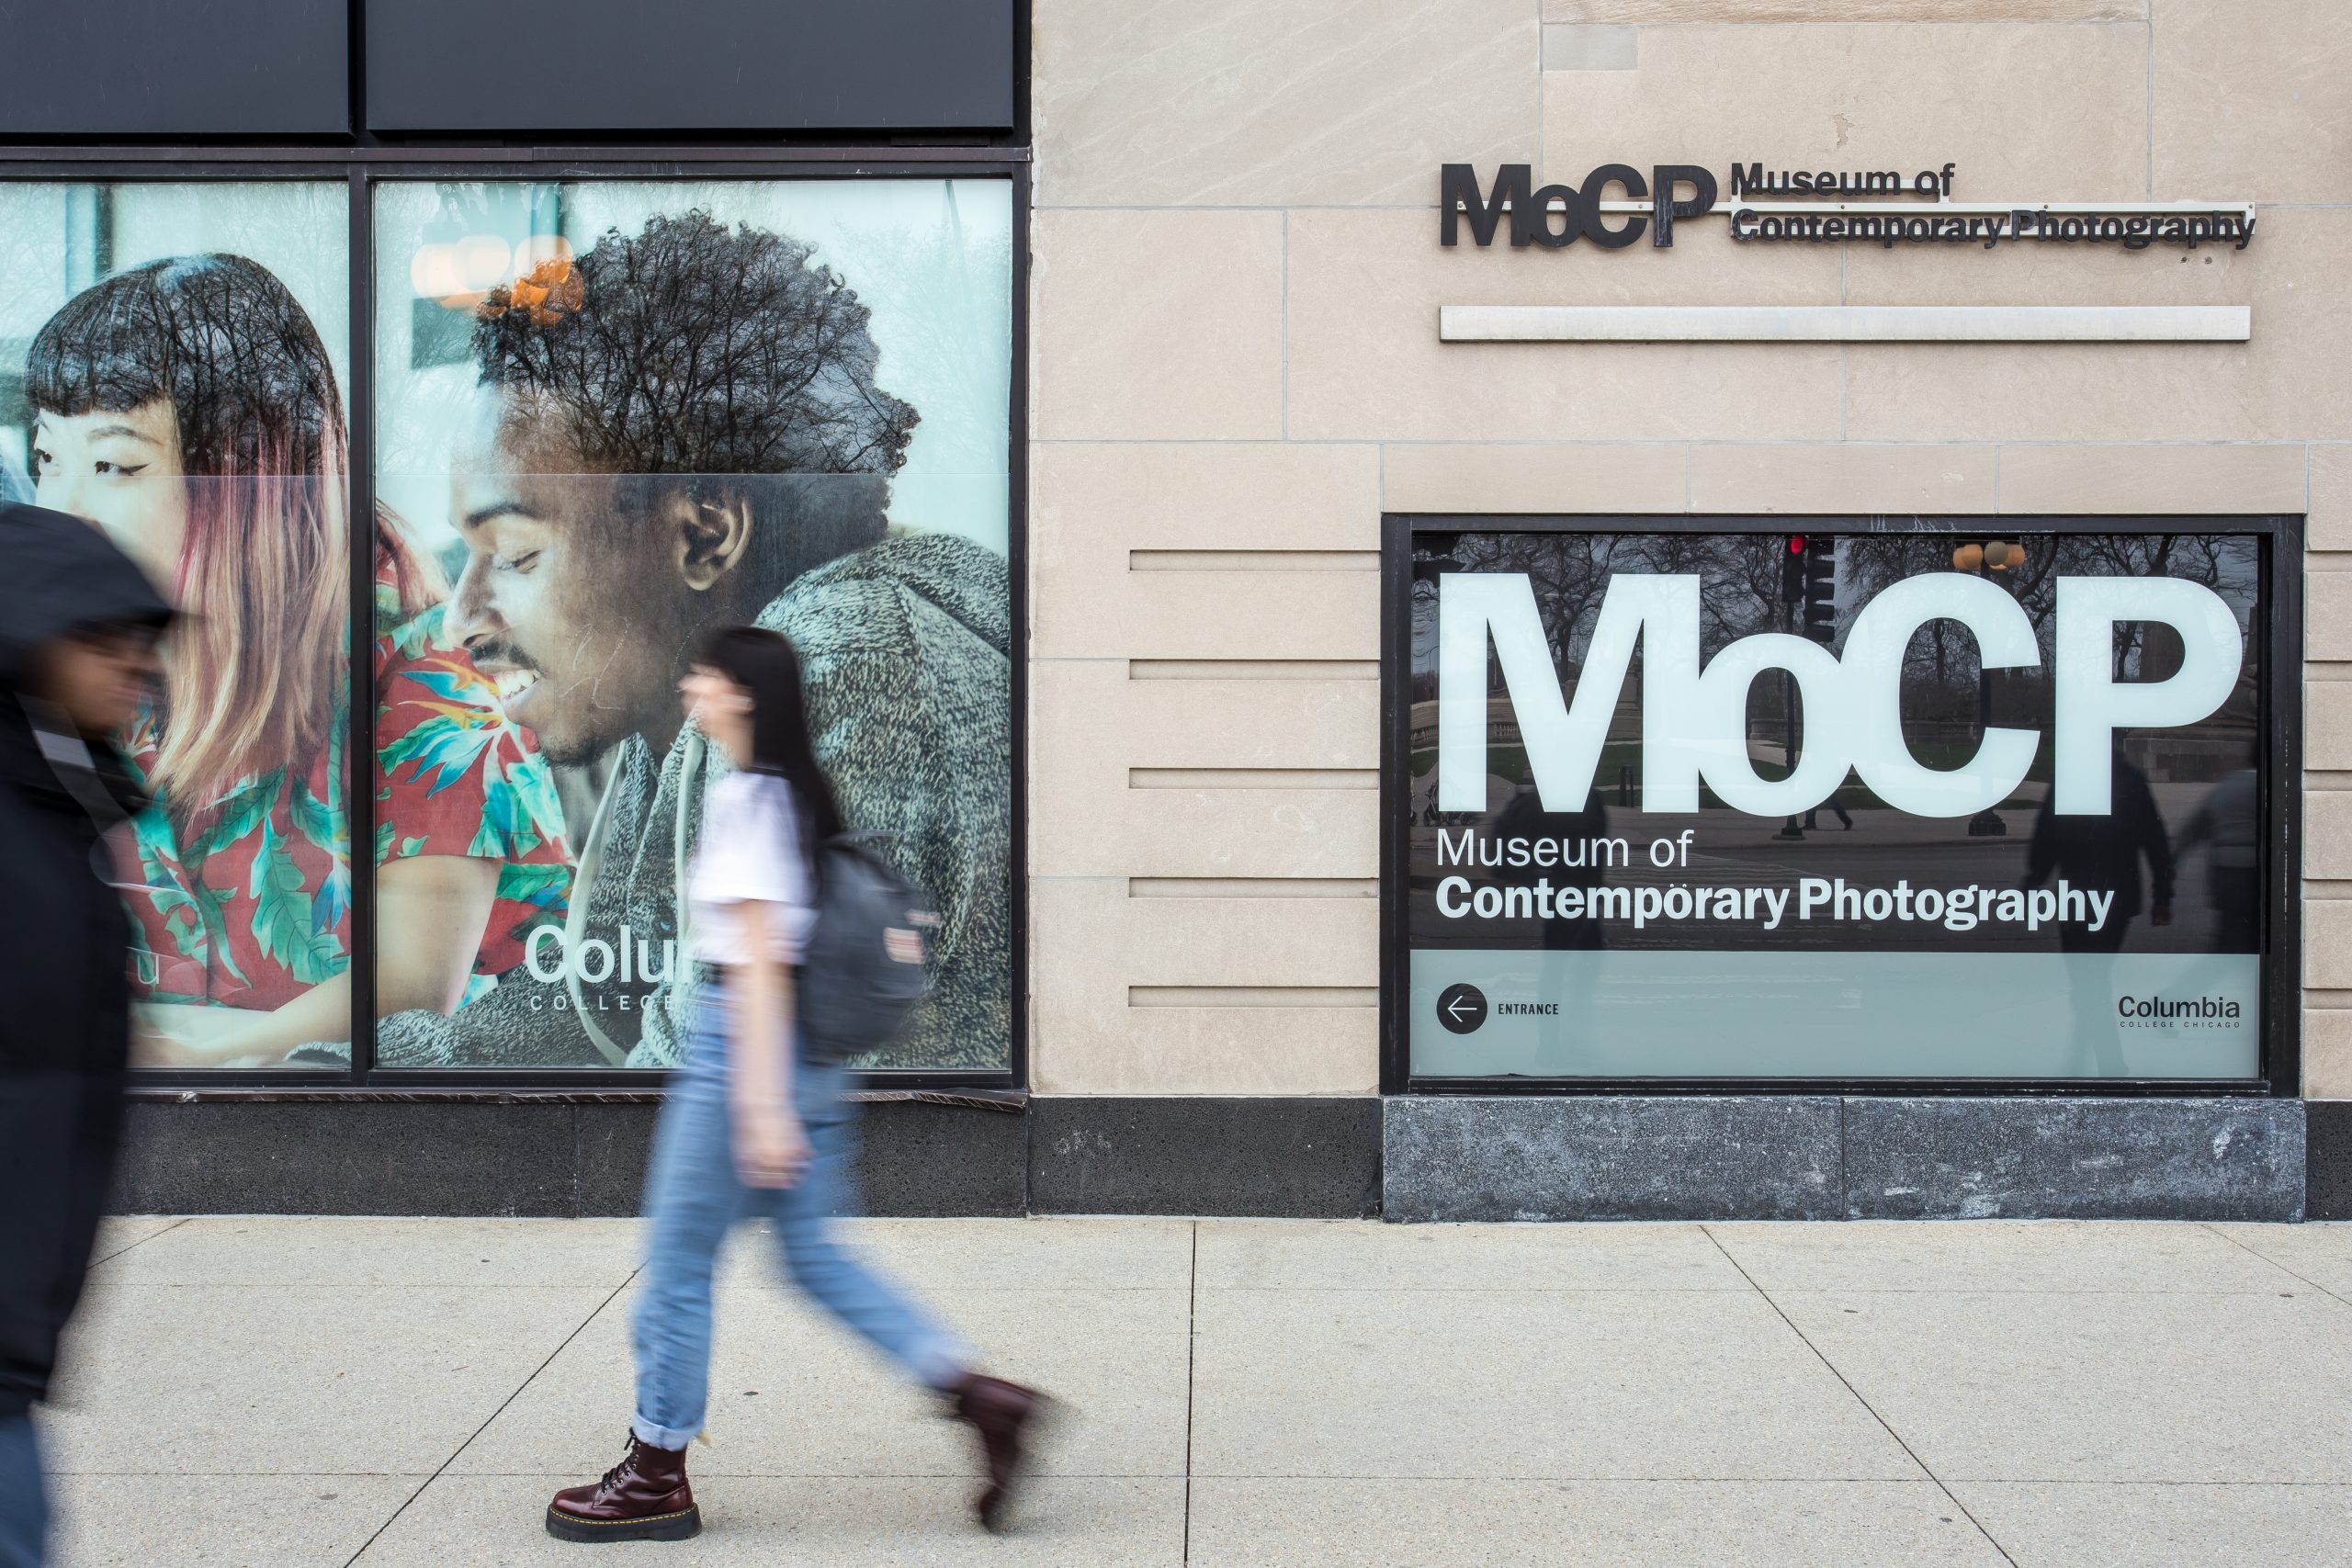 Pedestrians walk past a building with a sign on its facade that reads MoCP, Museum of Contemporary Photography